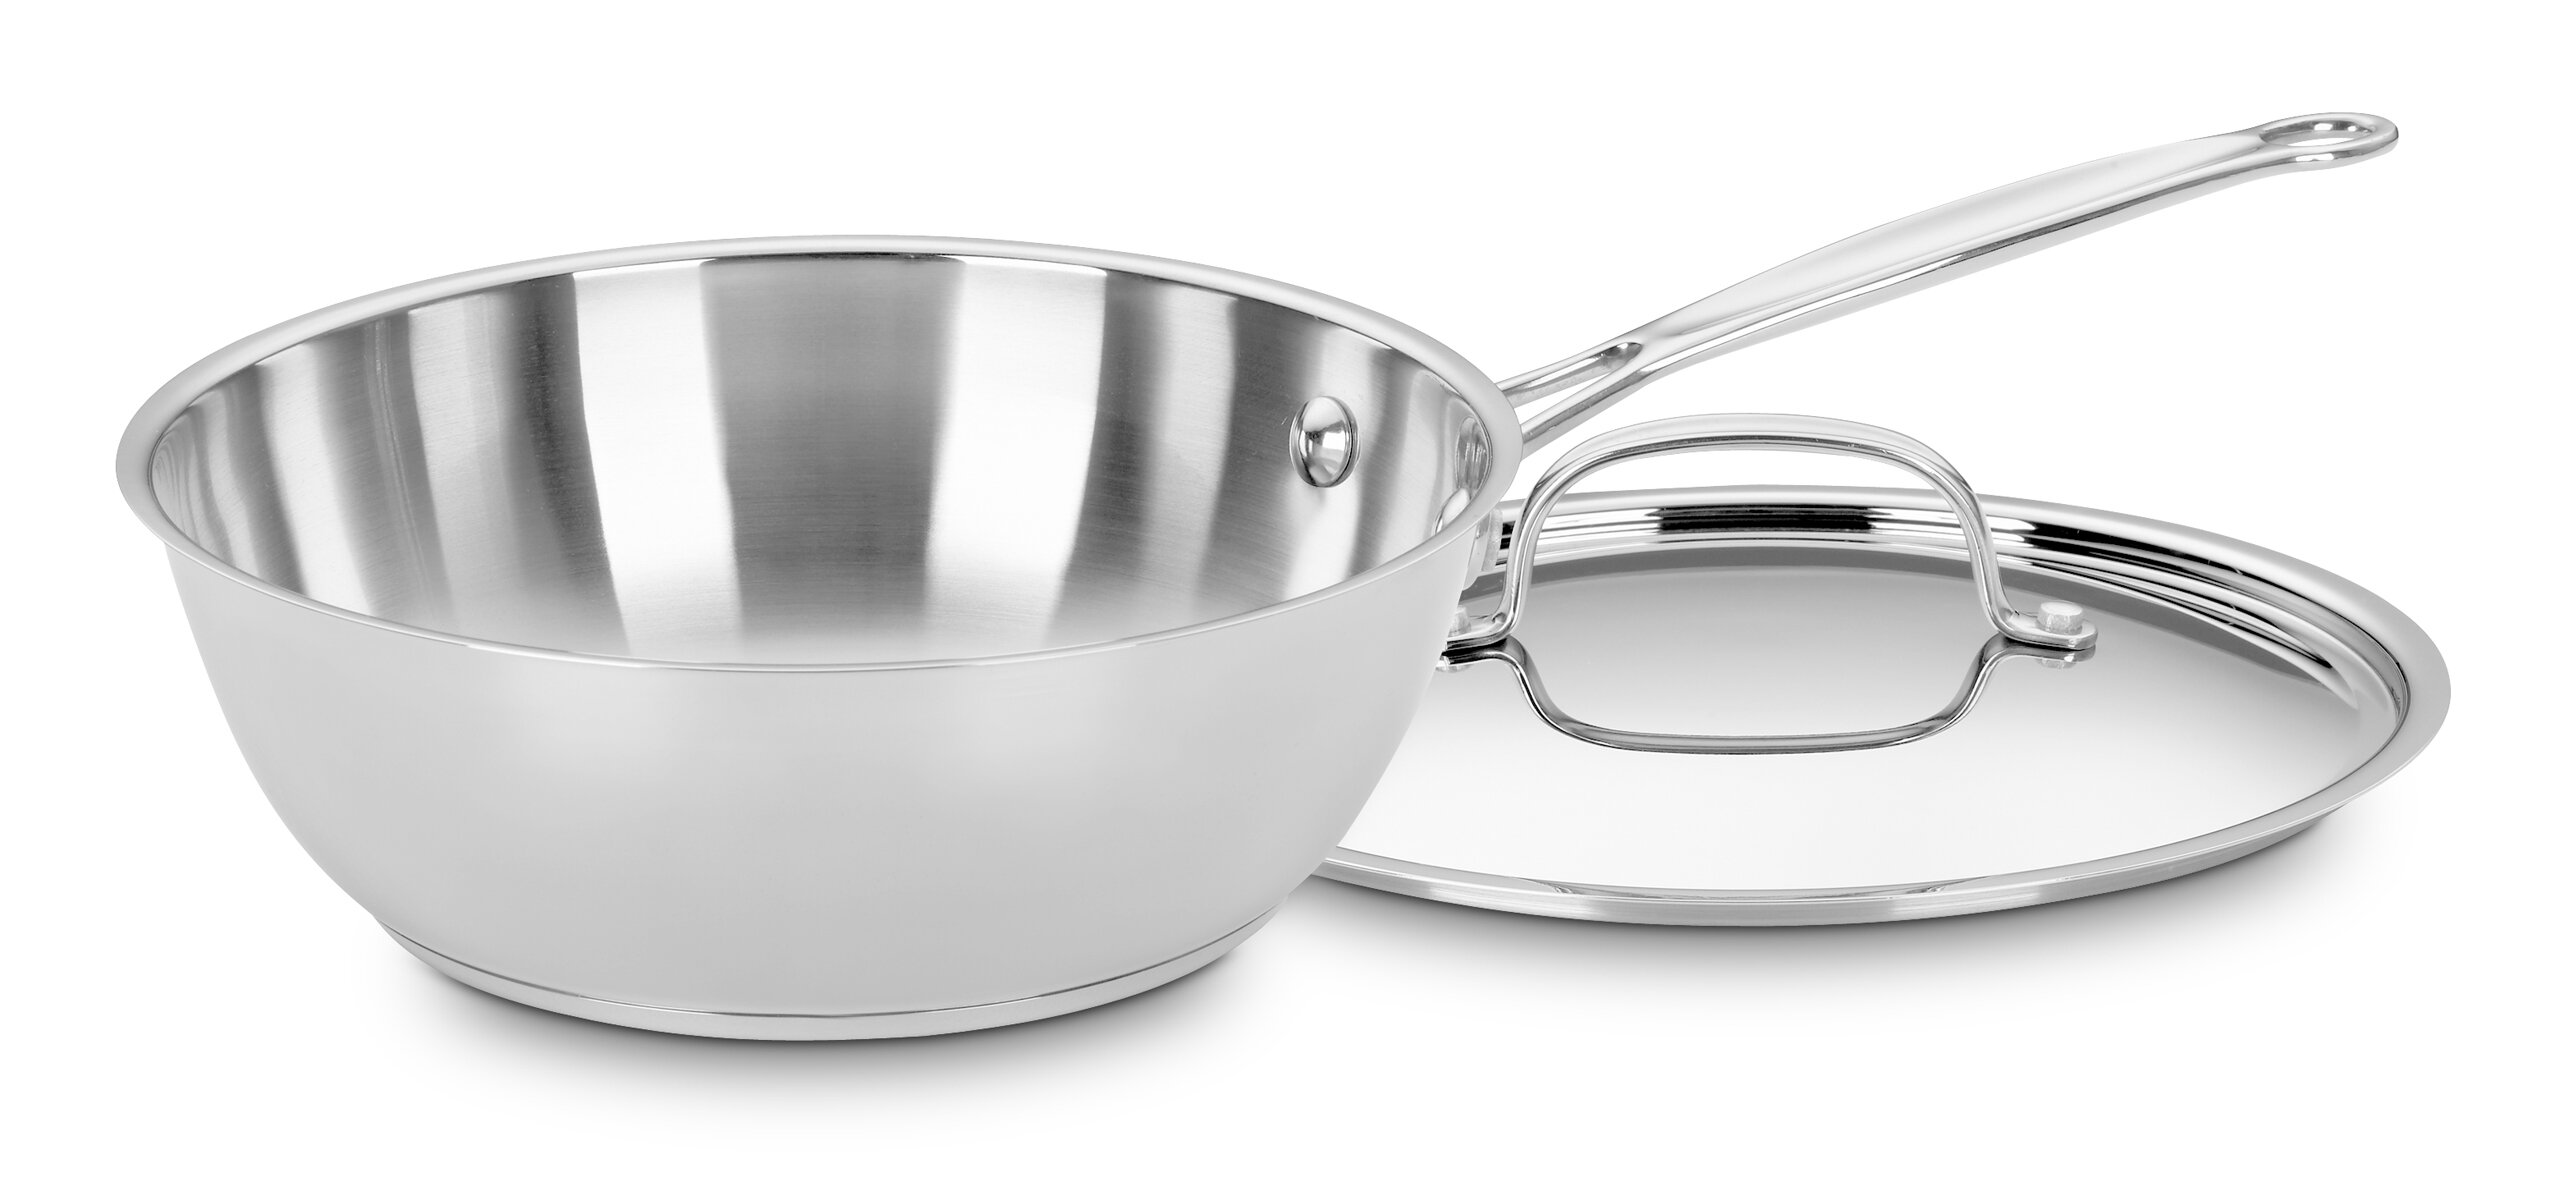 Cuisinart 3 qt. Stainless Steel Saucier with Lid & Reviews